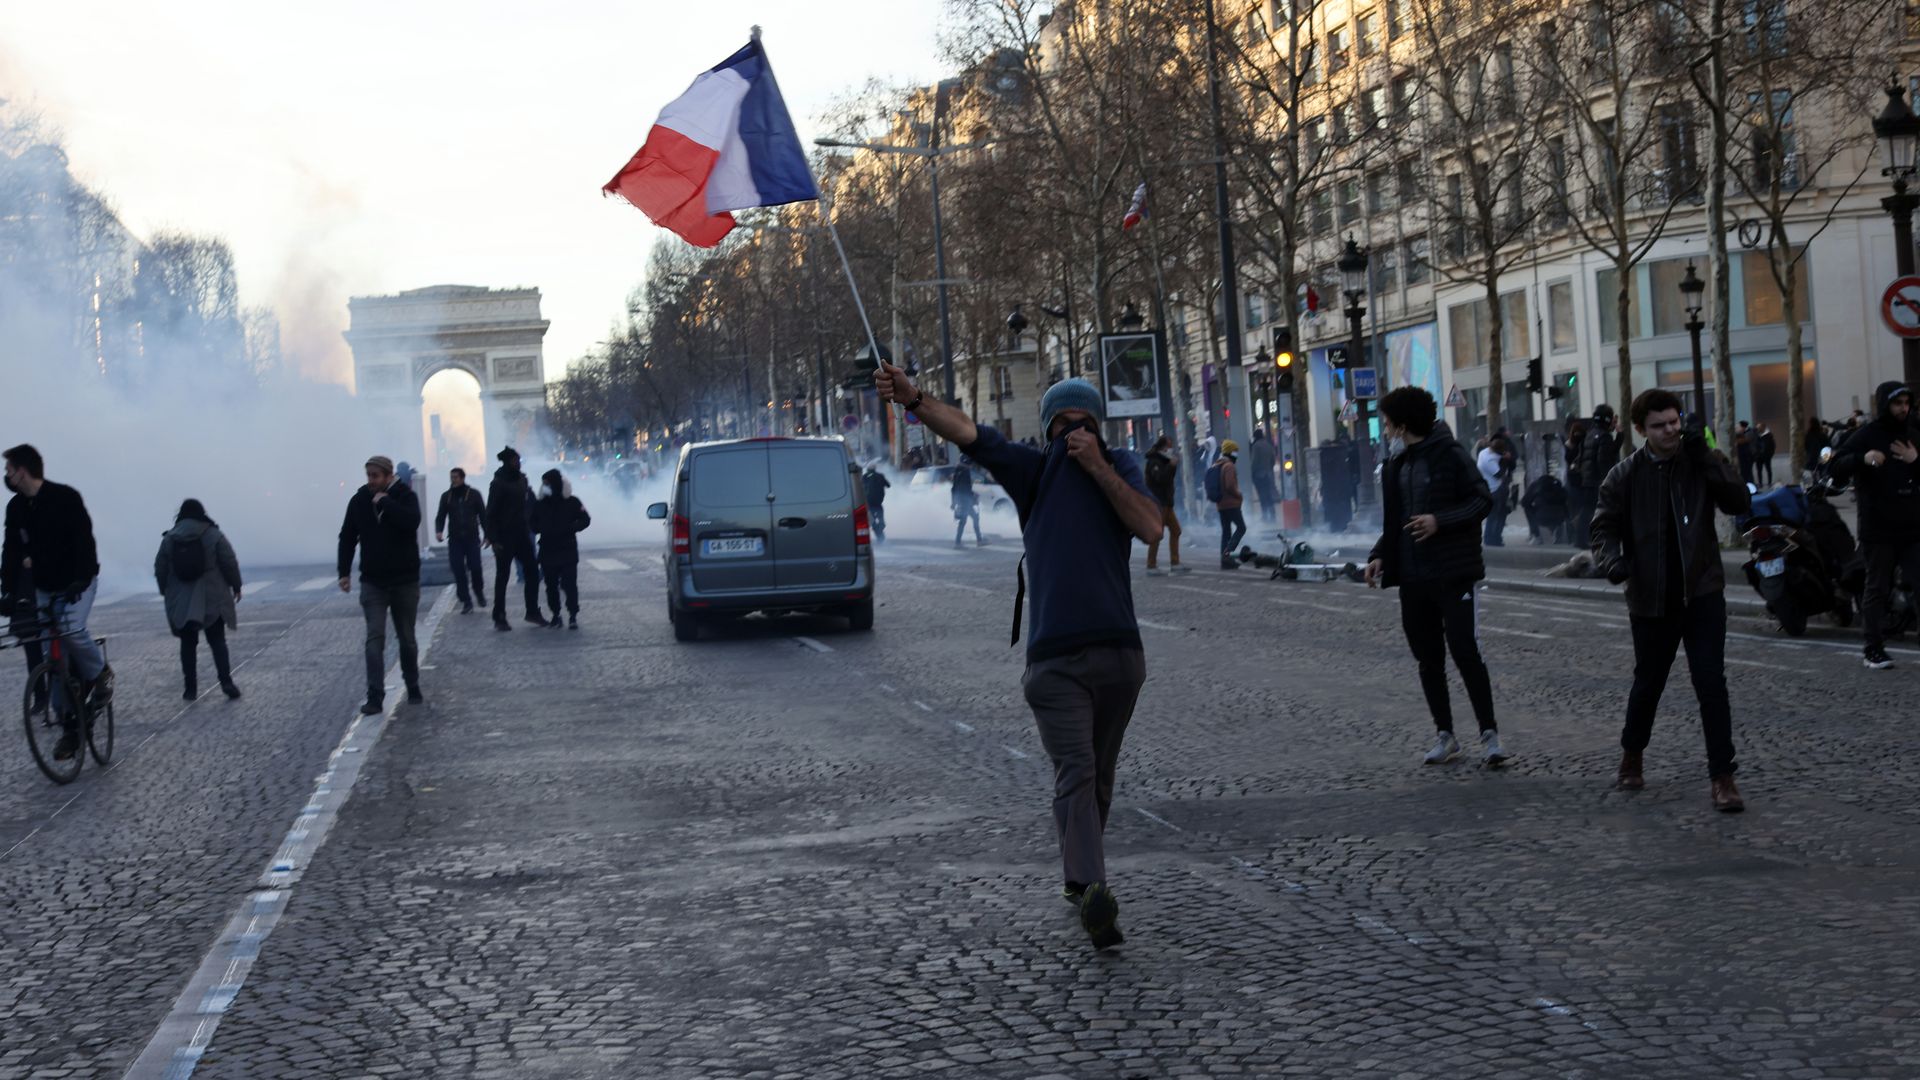 Demonstraters wave French flags and yellow vests on the Champs Elysees in Paris on February 12, 2022.